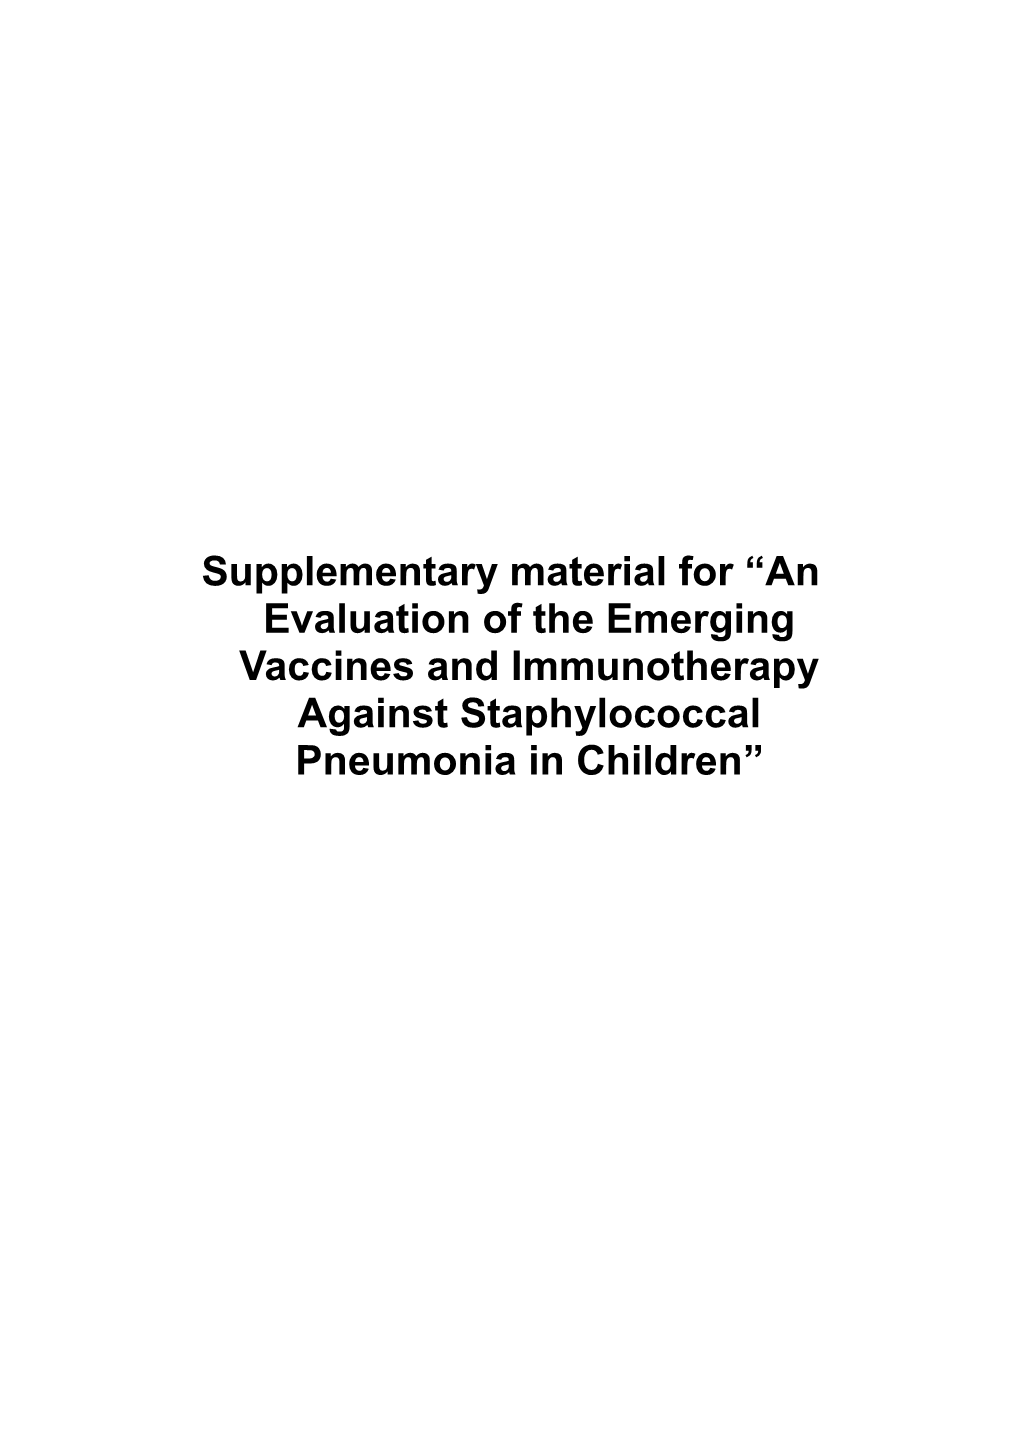 Supplementary Material for an Evaluation of the Emerging Vaccines and Immunotherapy Against